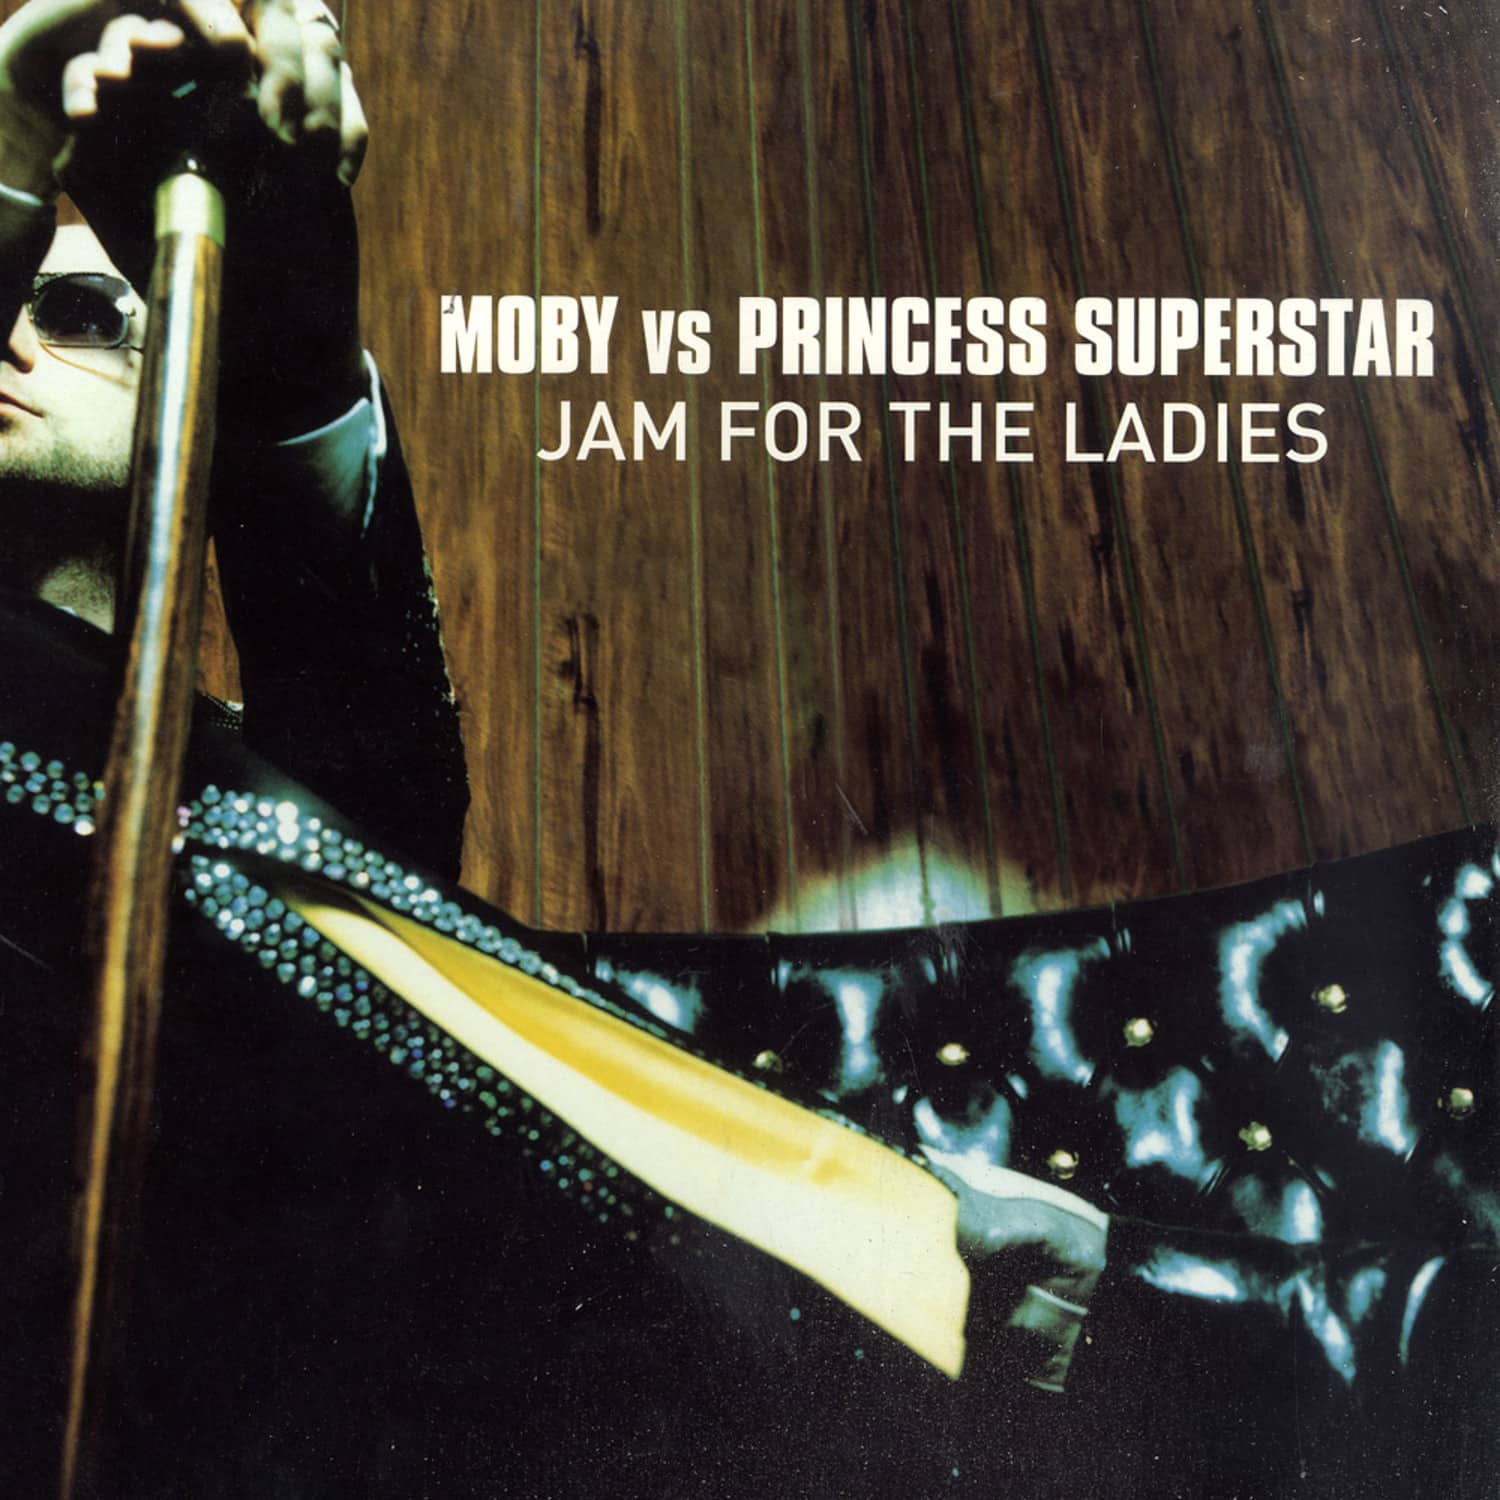 Moby vs Princess Superstar - JAM FOR THE LADIES